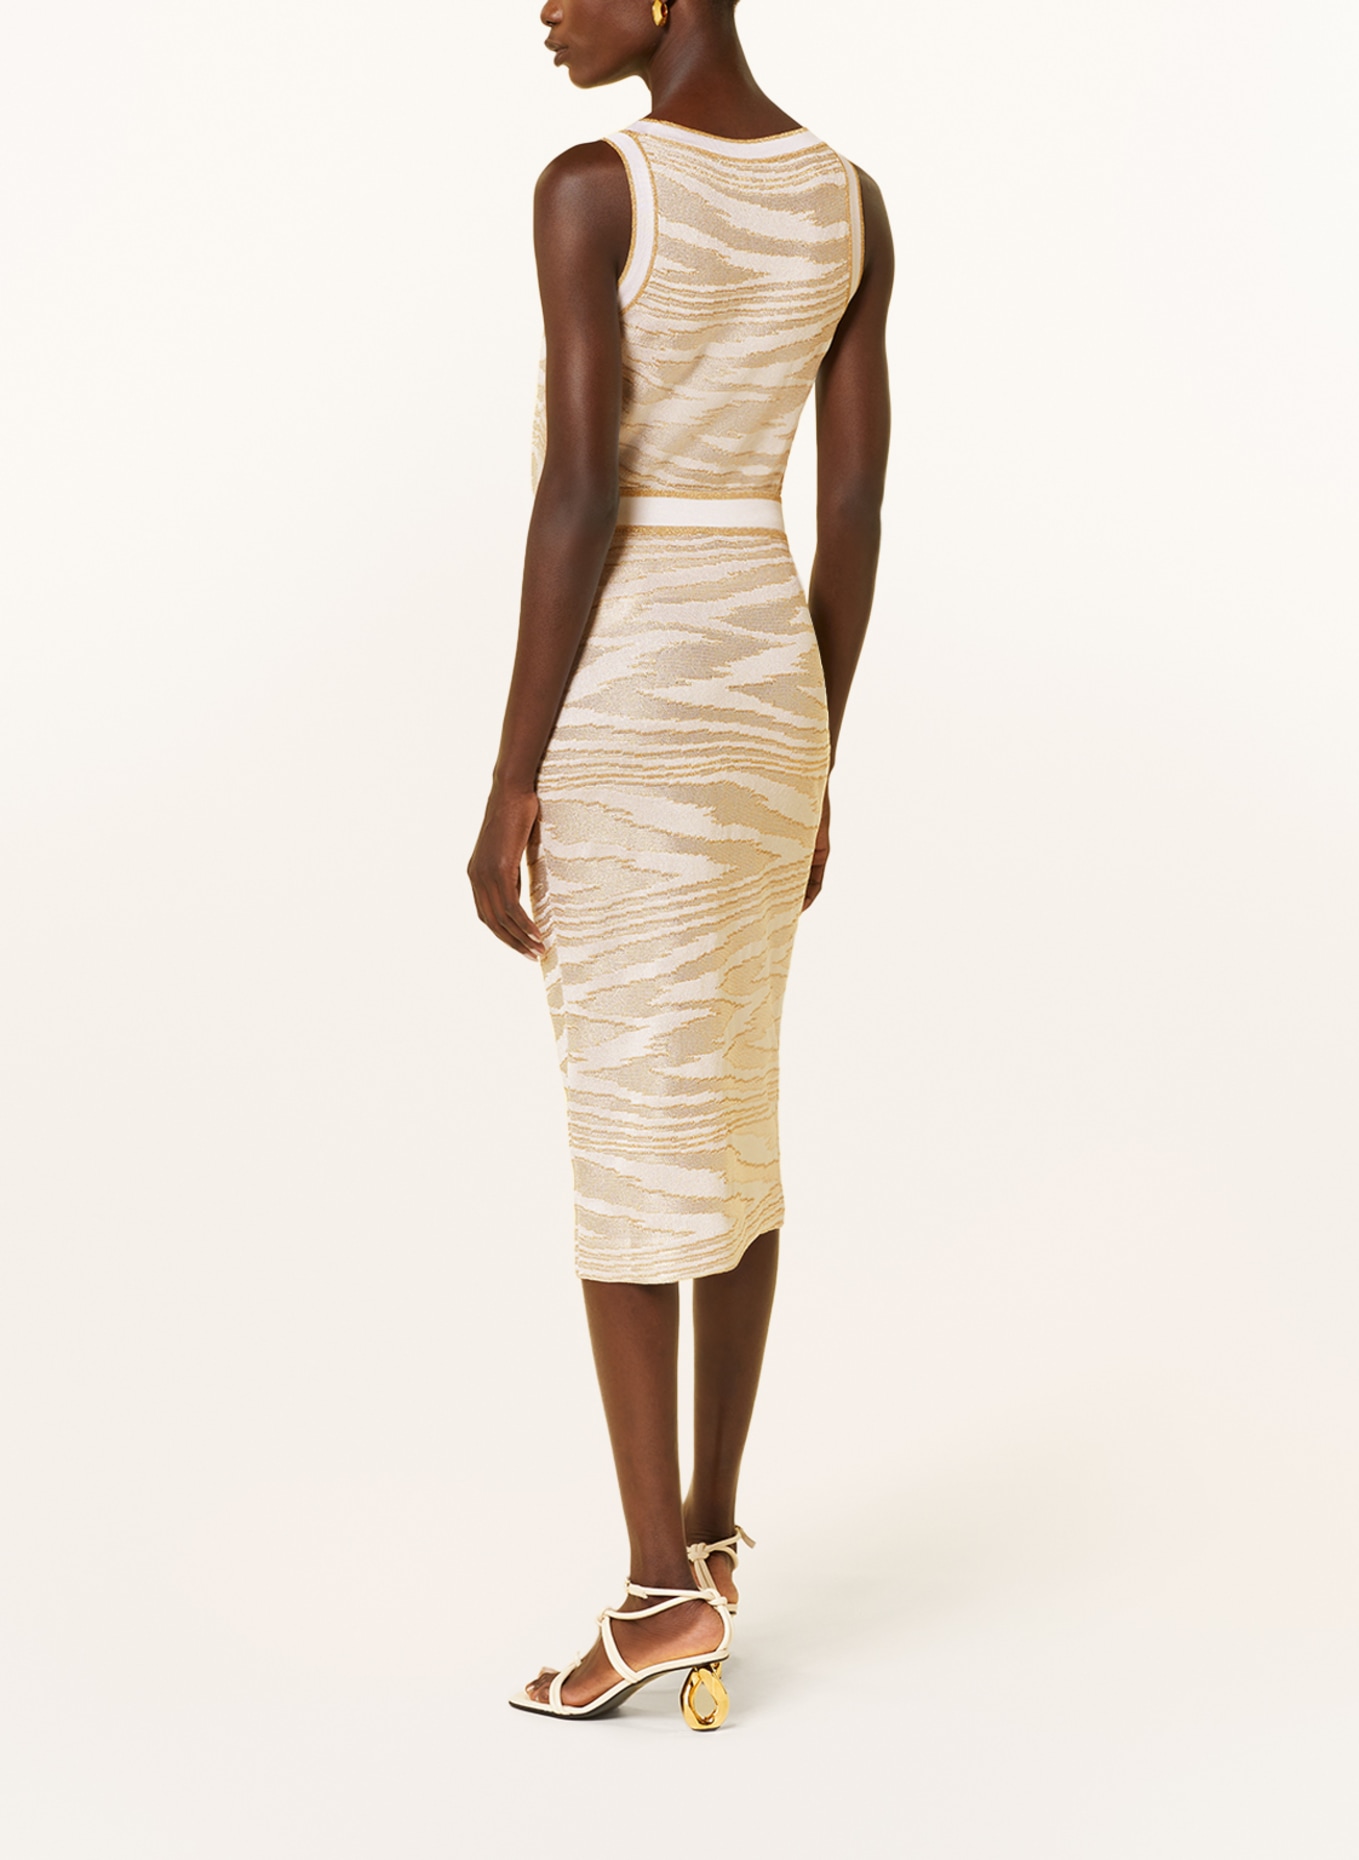 MISSONI Knit skirt with glitter thread, Color: CREAM/ GOLD (Image 3)